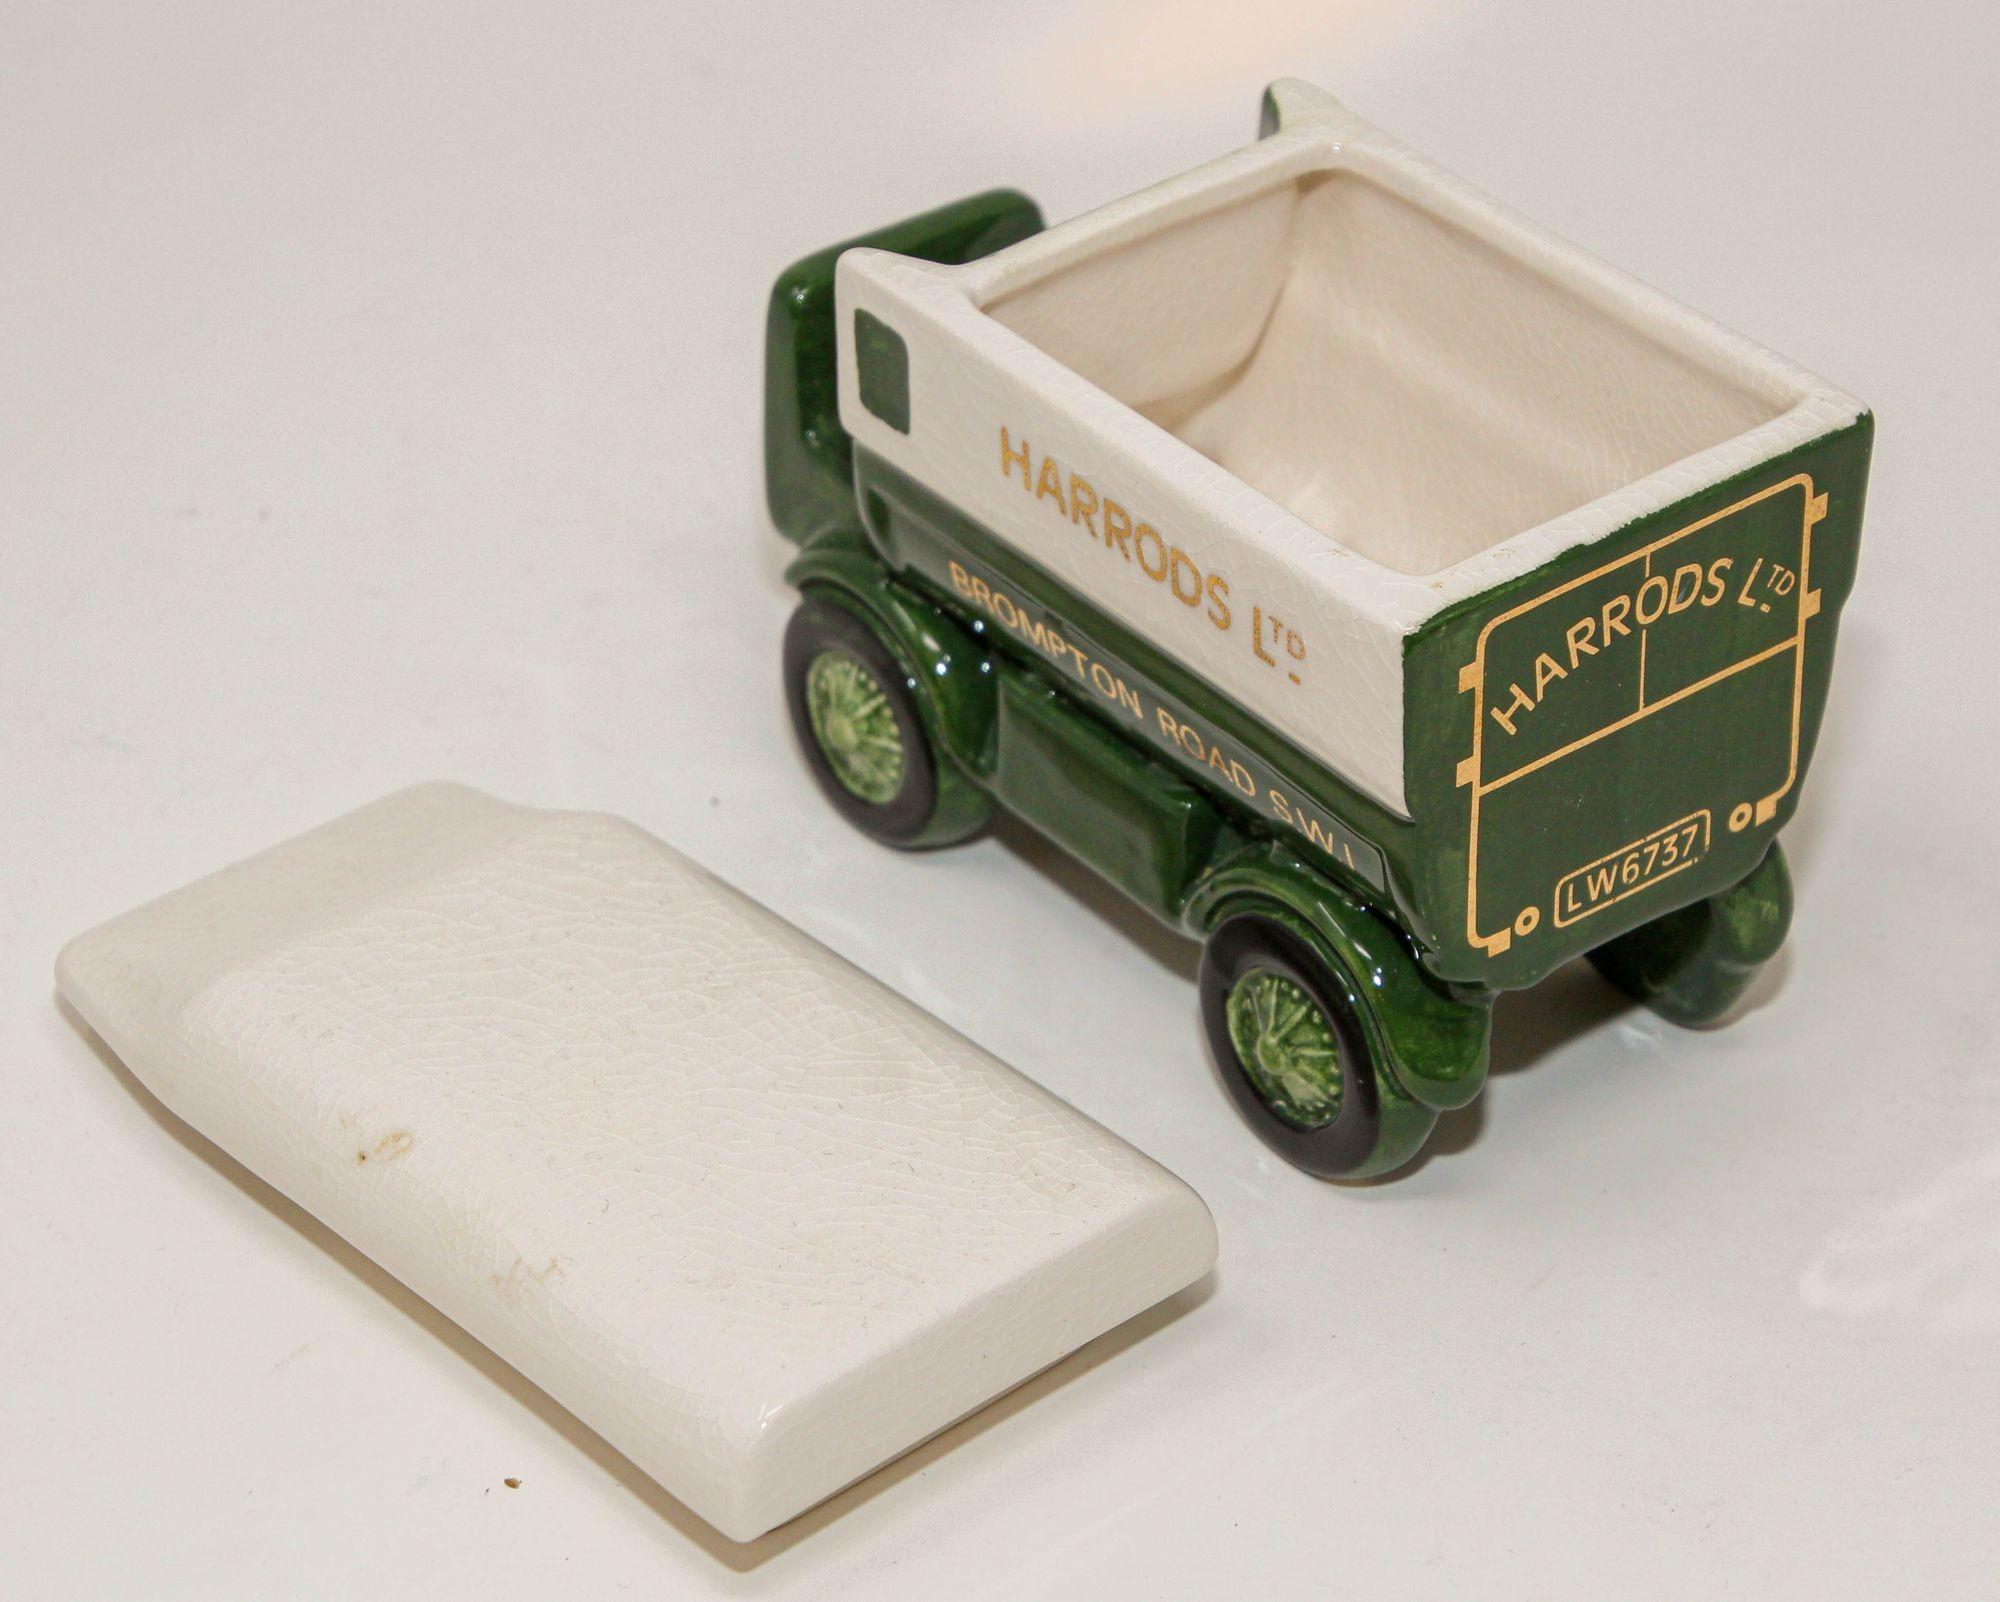 British Harrods Porcelain Delivery Truck Lidded Tea Caddy Box London Pottery England For Sale